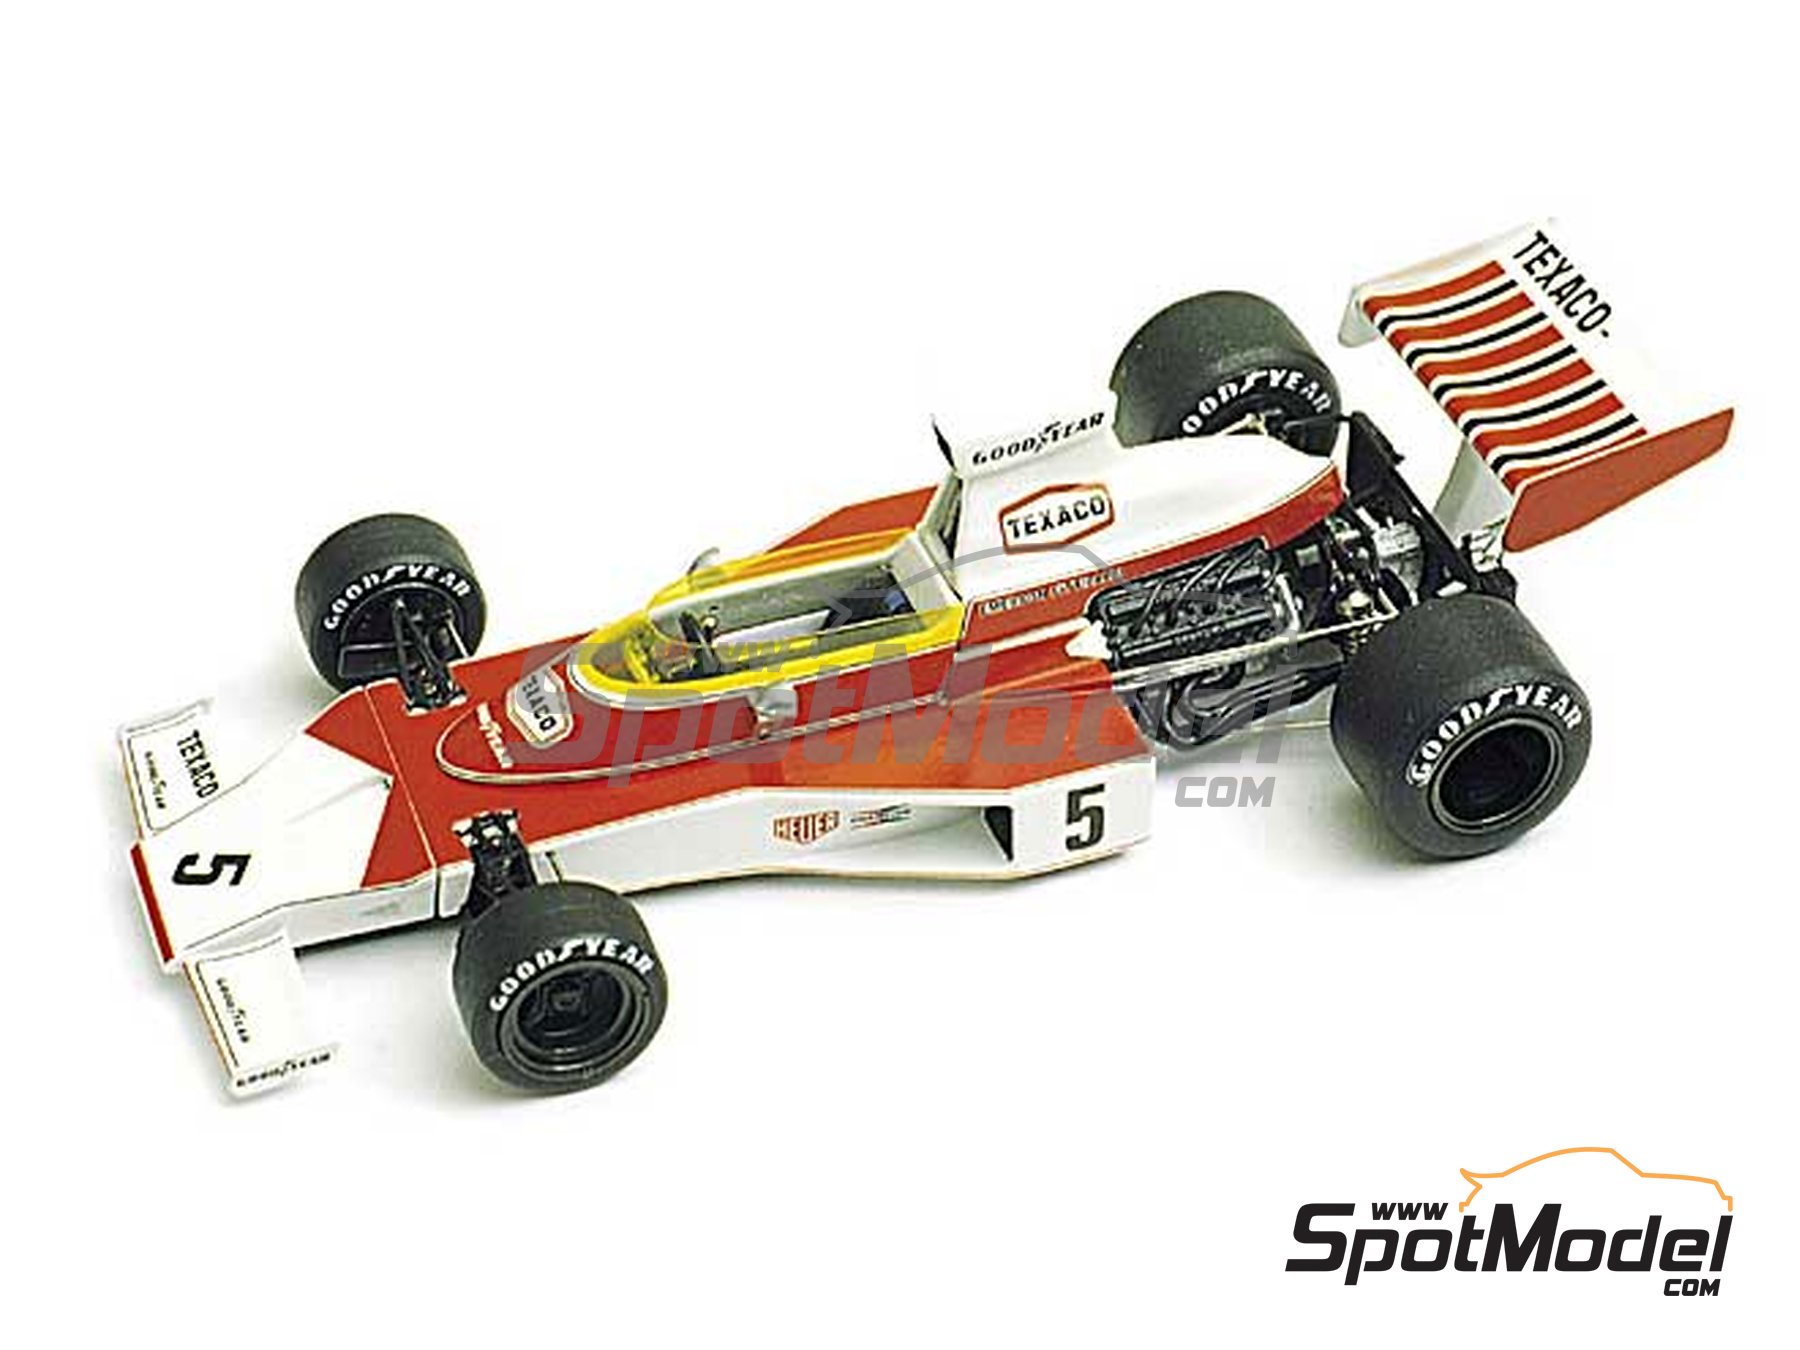 Tamiya 1/12 F1 McLaren M23 1974 TEAXCO Super Detail Kit With Etching Parts for sale online 